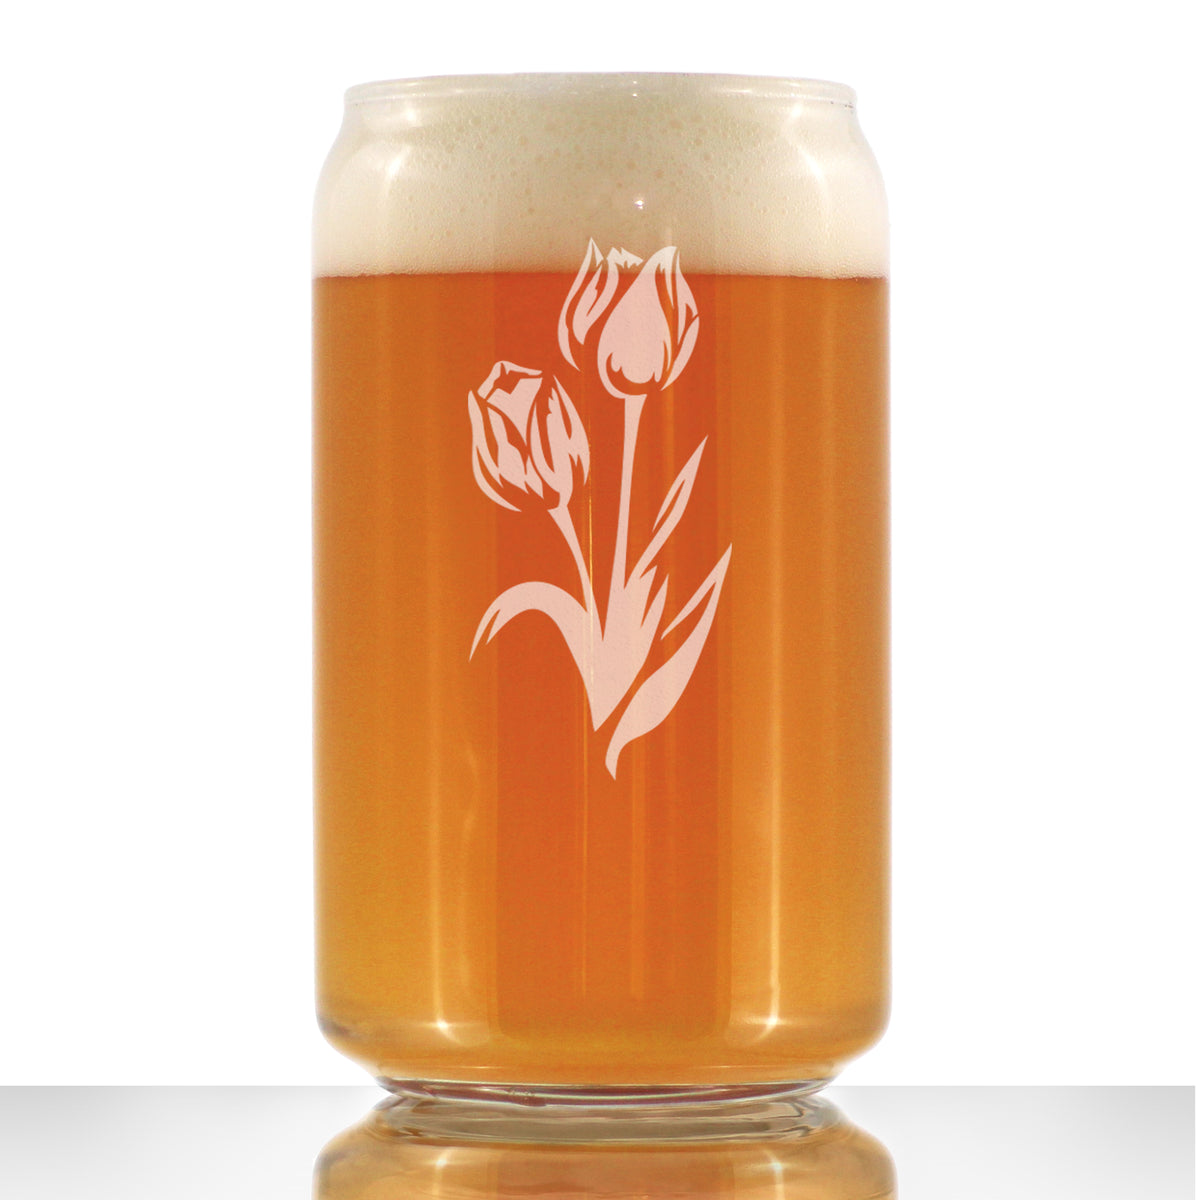 Tulip Beer Can Pint Glass - Floral Themed Decor and Gifts for Flower Lovers - 16 oz Glasses